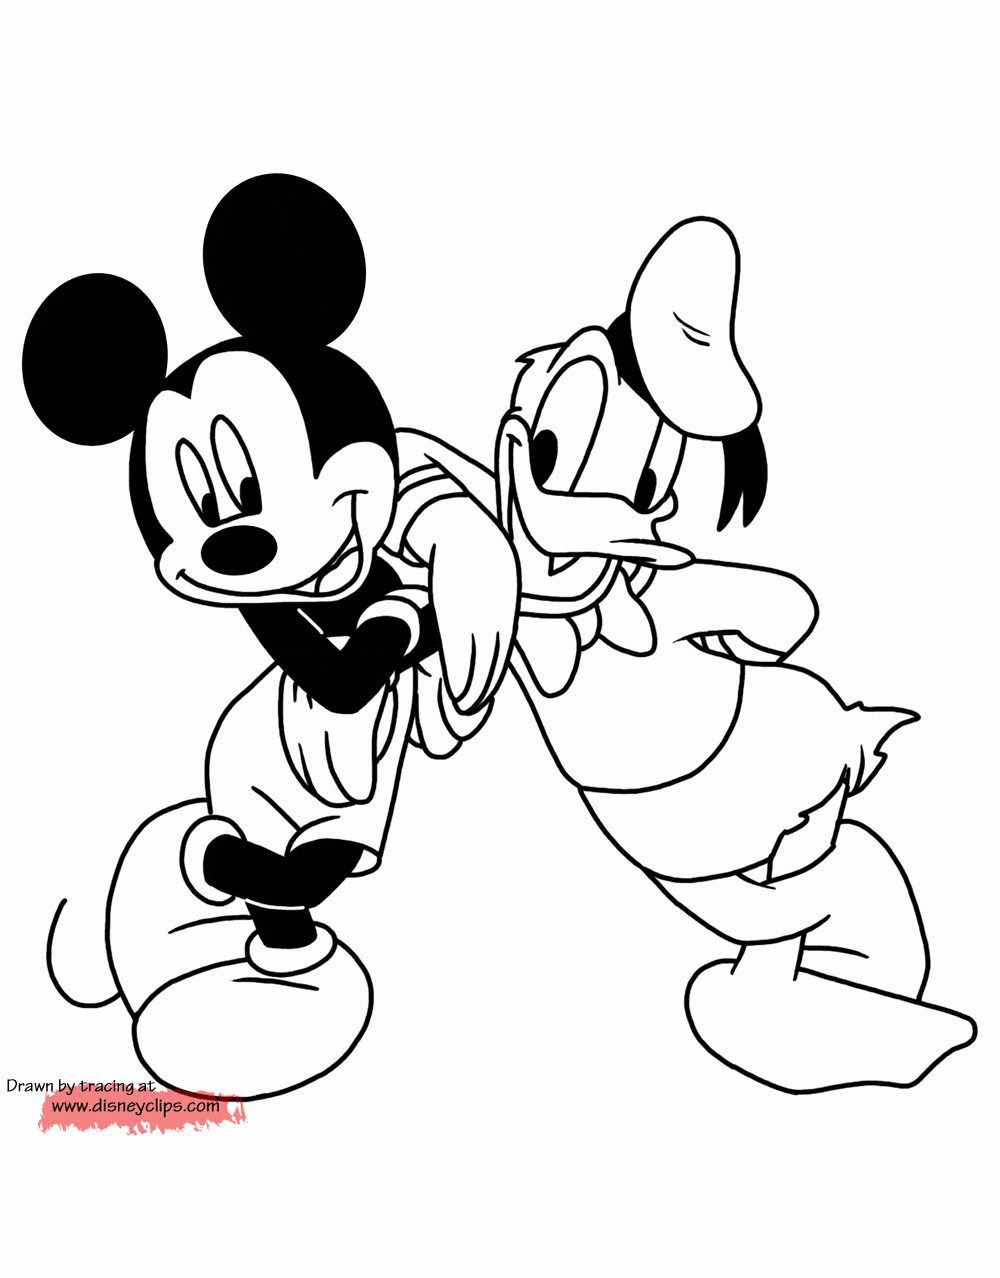 14 Fashionable Mickey Mouse Vase 2024 free download mickey mouse vase of baby mickey mouse coloring pages fresh mickey mouse original drawing within baby mickey mouse coloring pages fresh mickey mouse original drawing at getdrawings